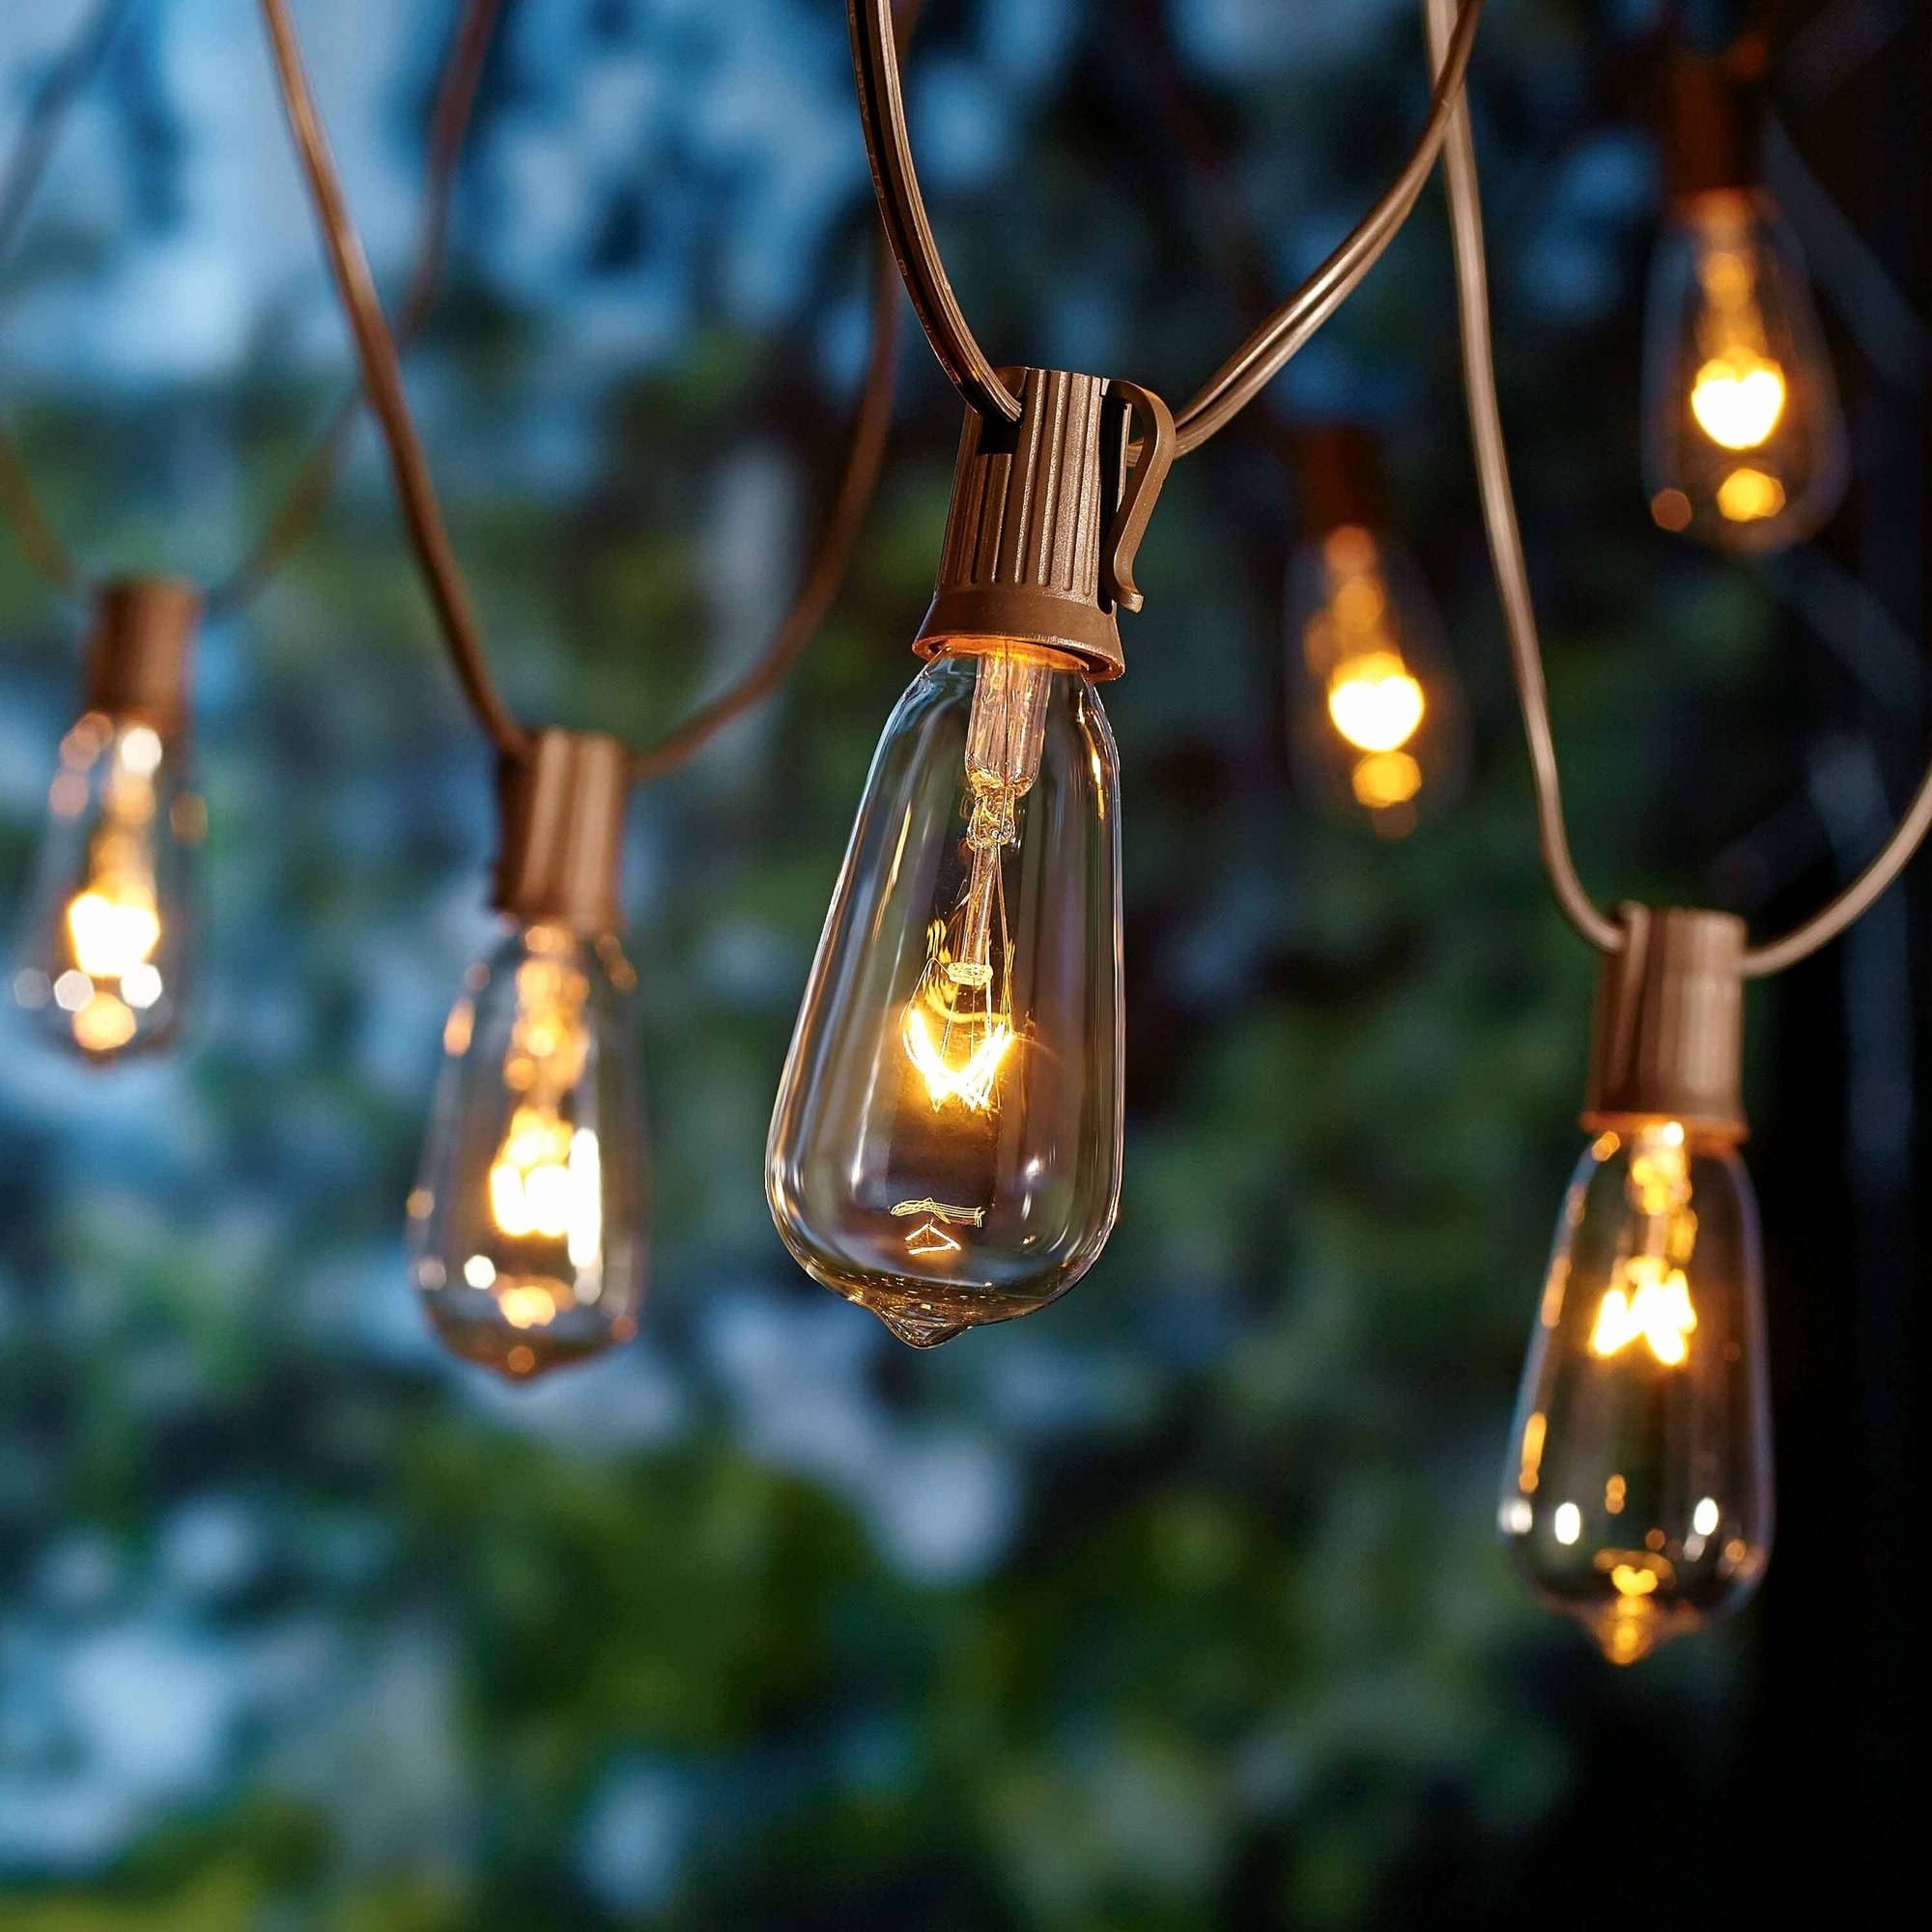 Edison Outdoor String Light Inspirational Better Homes And Gardens Intended For Garden And Outdoor String Lights (View 15 of 15)